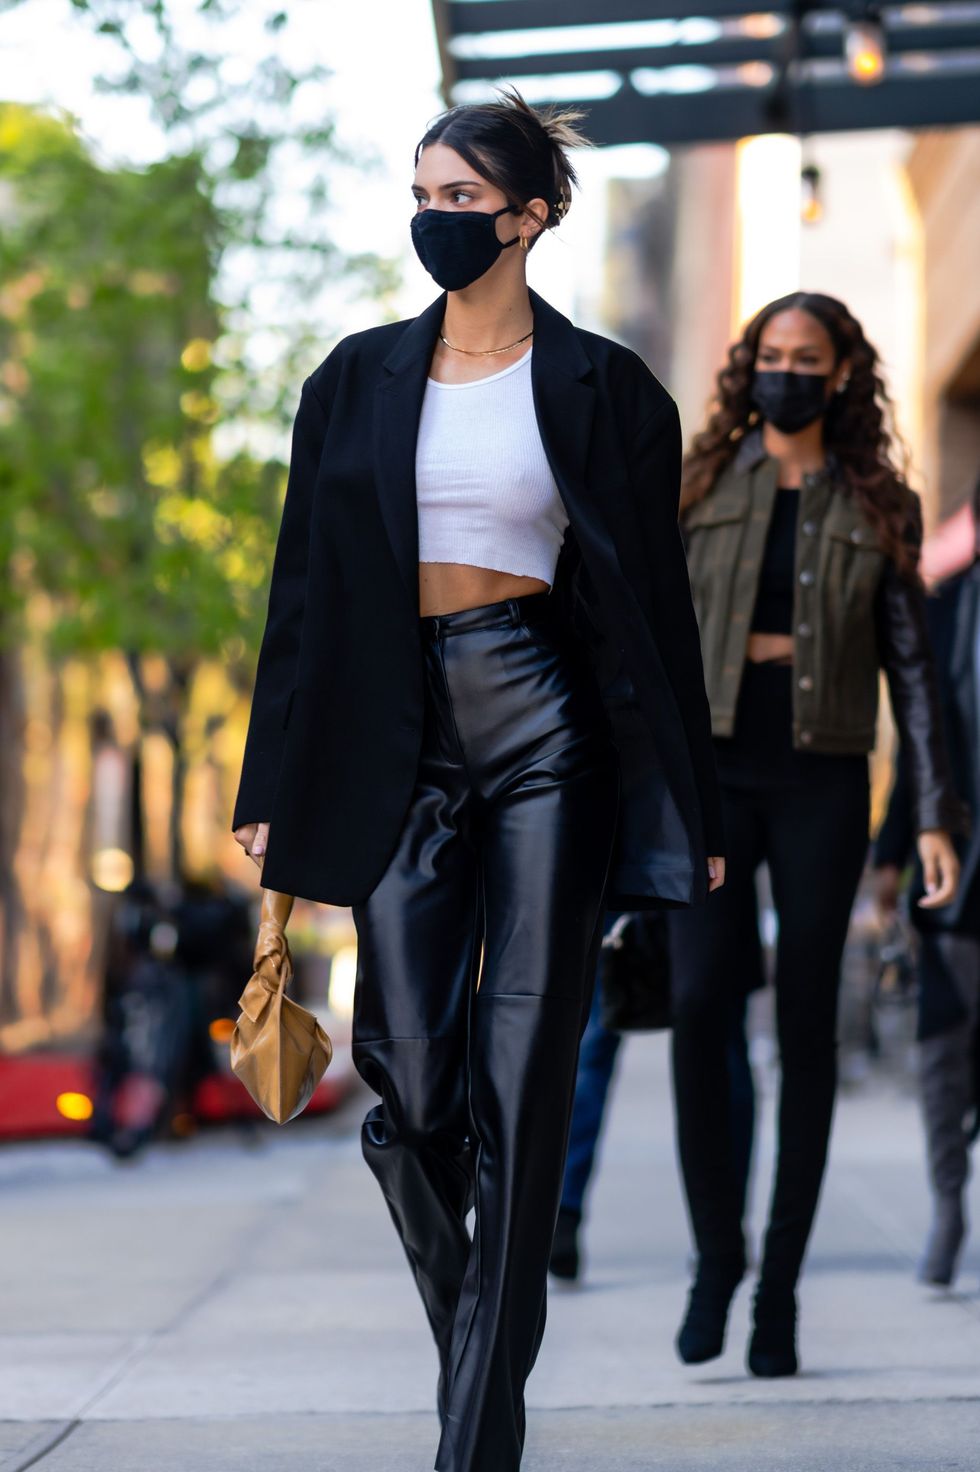 Kendall Jenner wears a bra in public  Kendall jenner street style,  Fashion, Fashion outfits